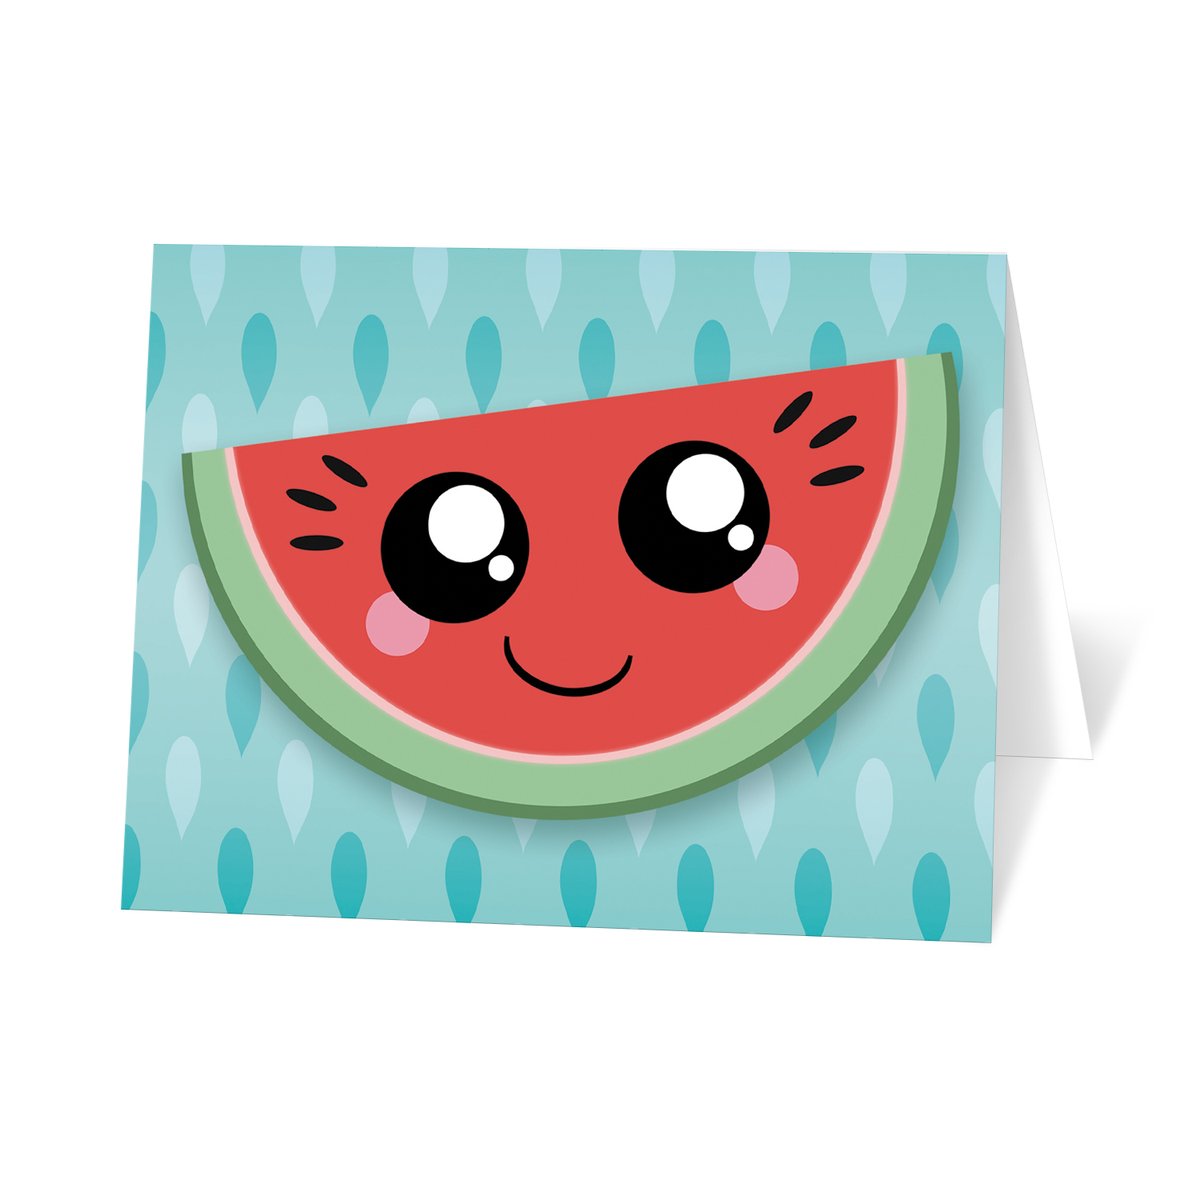 Slice note cards . Watermelon clipart smiling watermelon